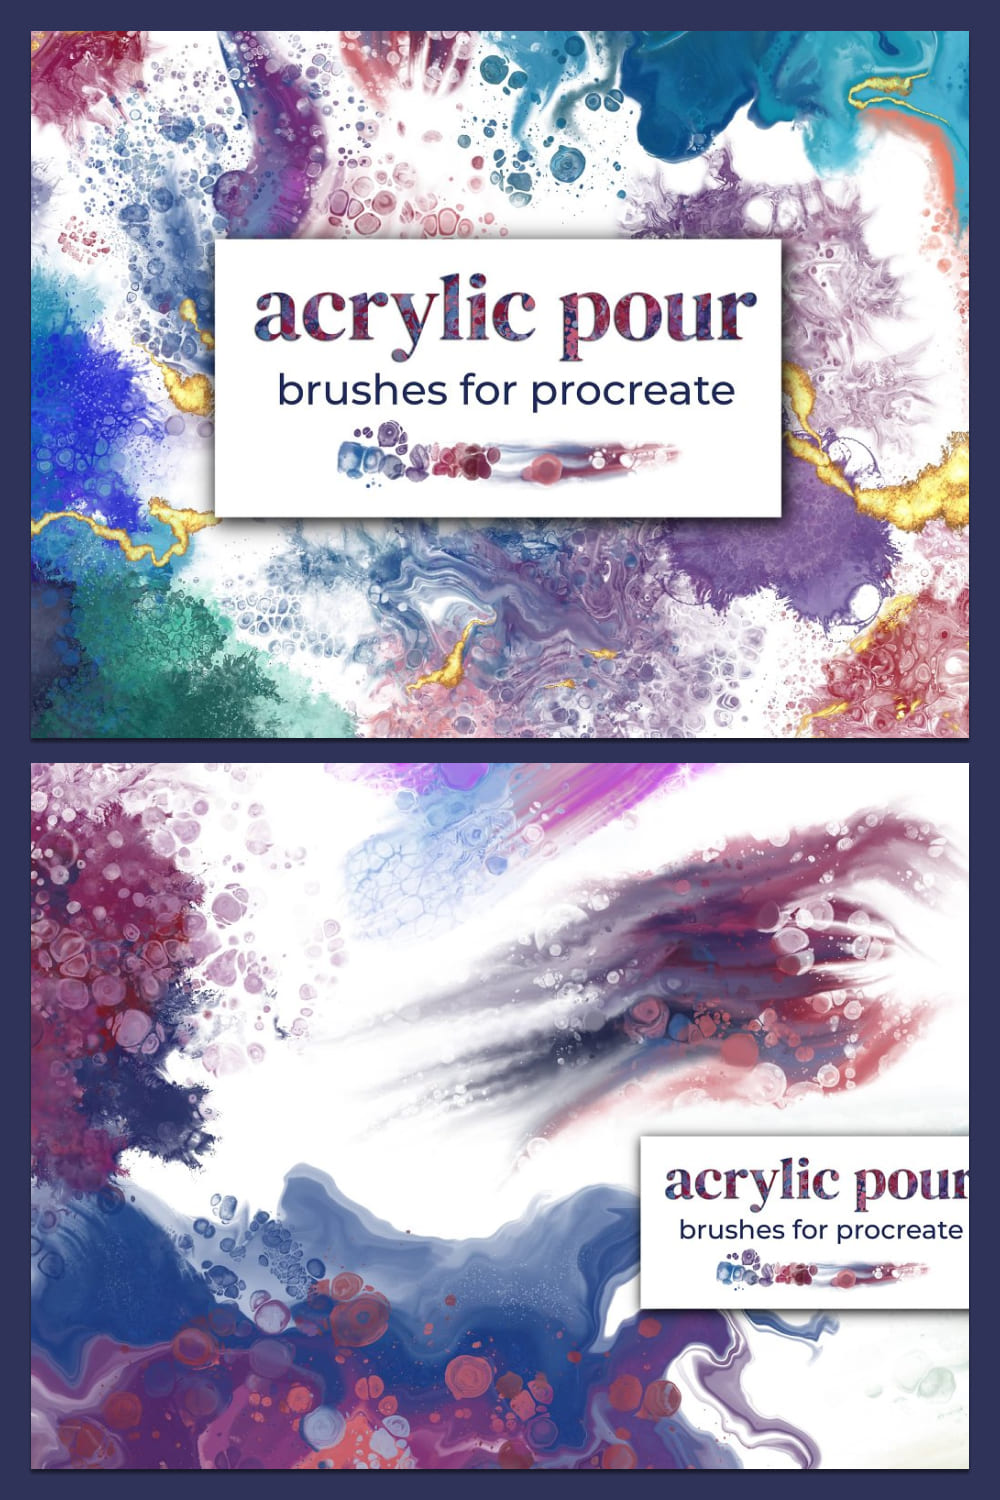 Acrylic Pour Brushes for Procreate - pinterest image preview.